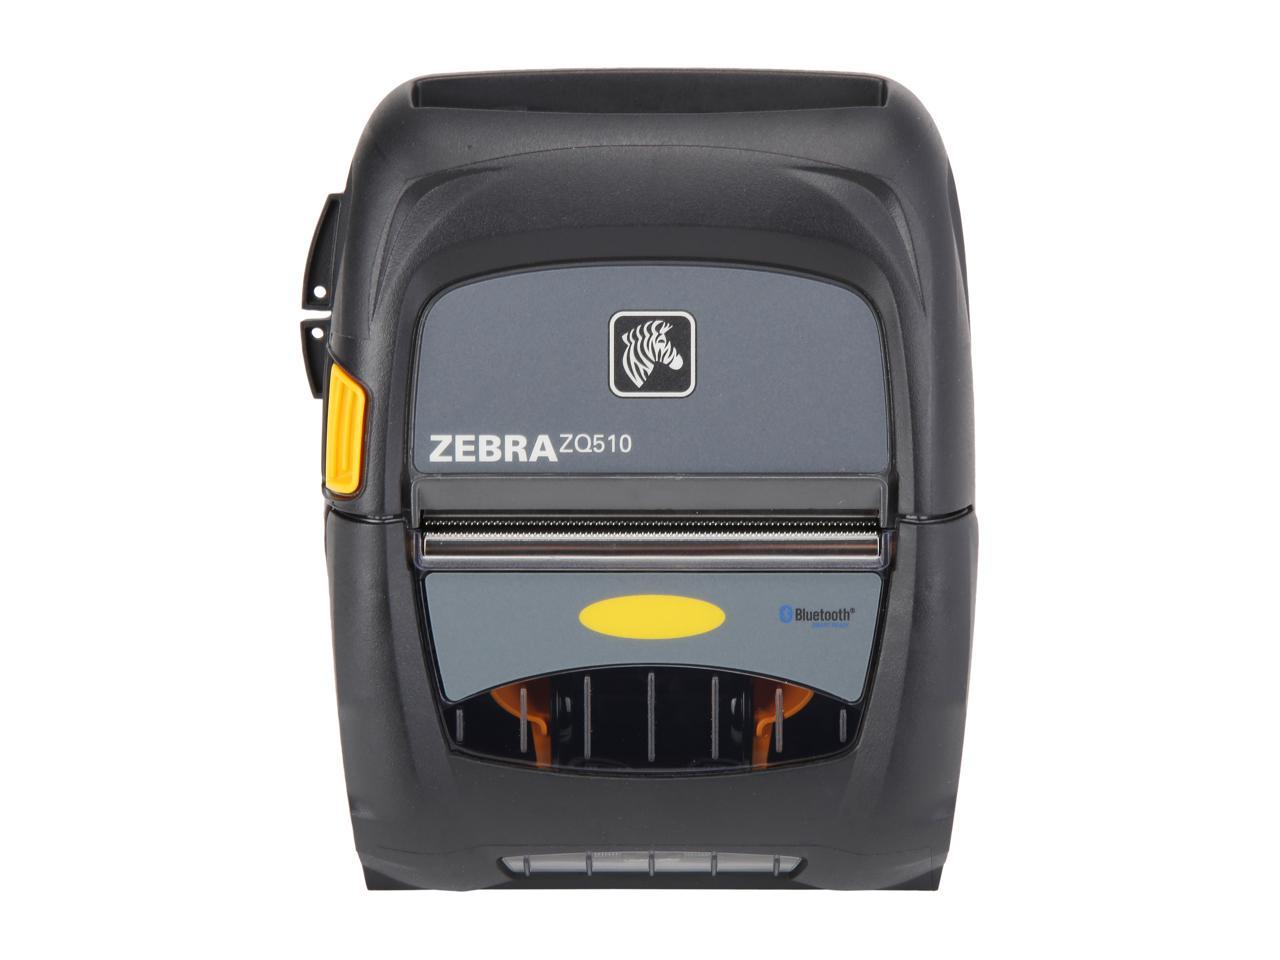 Zebra Zq510 3 Mobile Direct Thermal Receipt And Label Printer 203 Dpi Bluetooth 40 Linered 9532